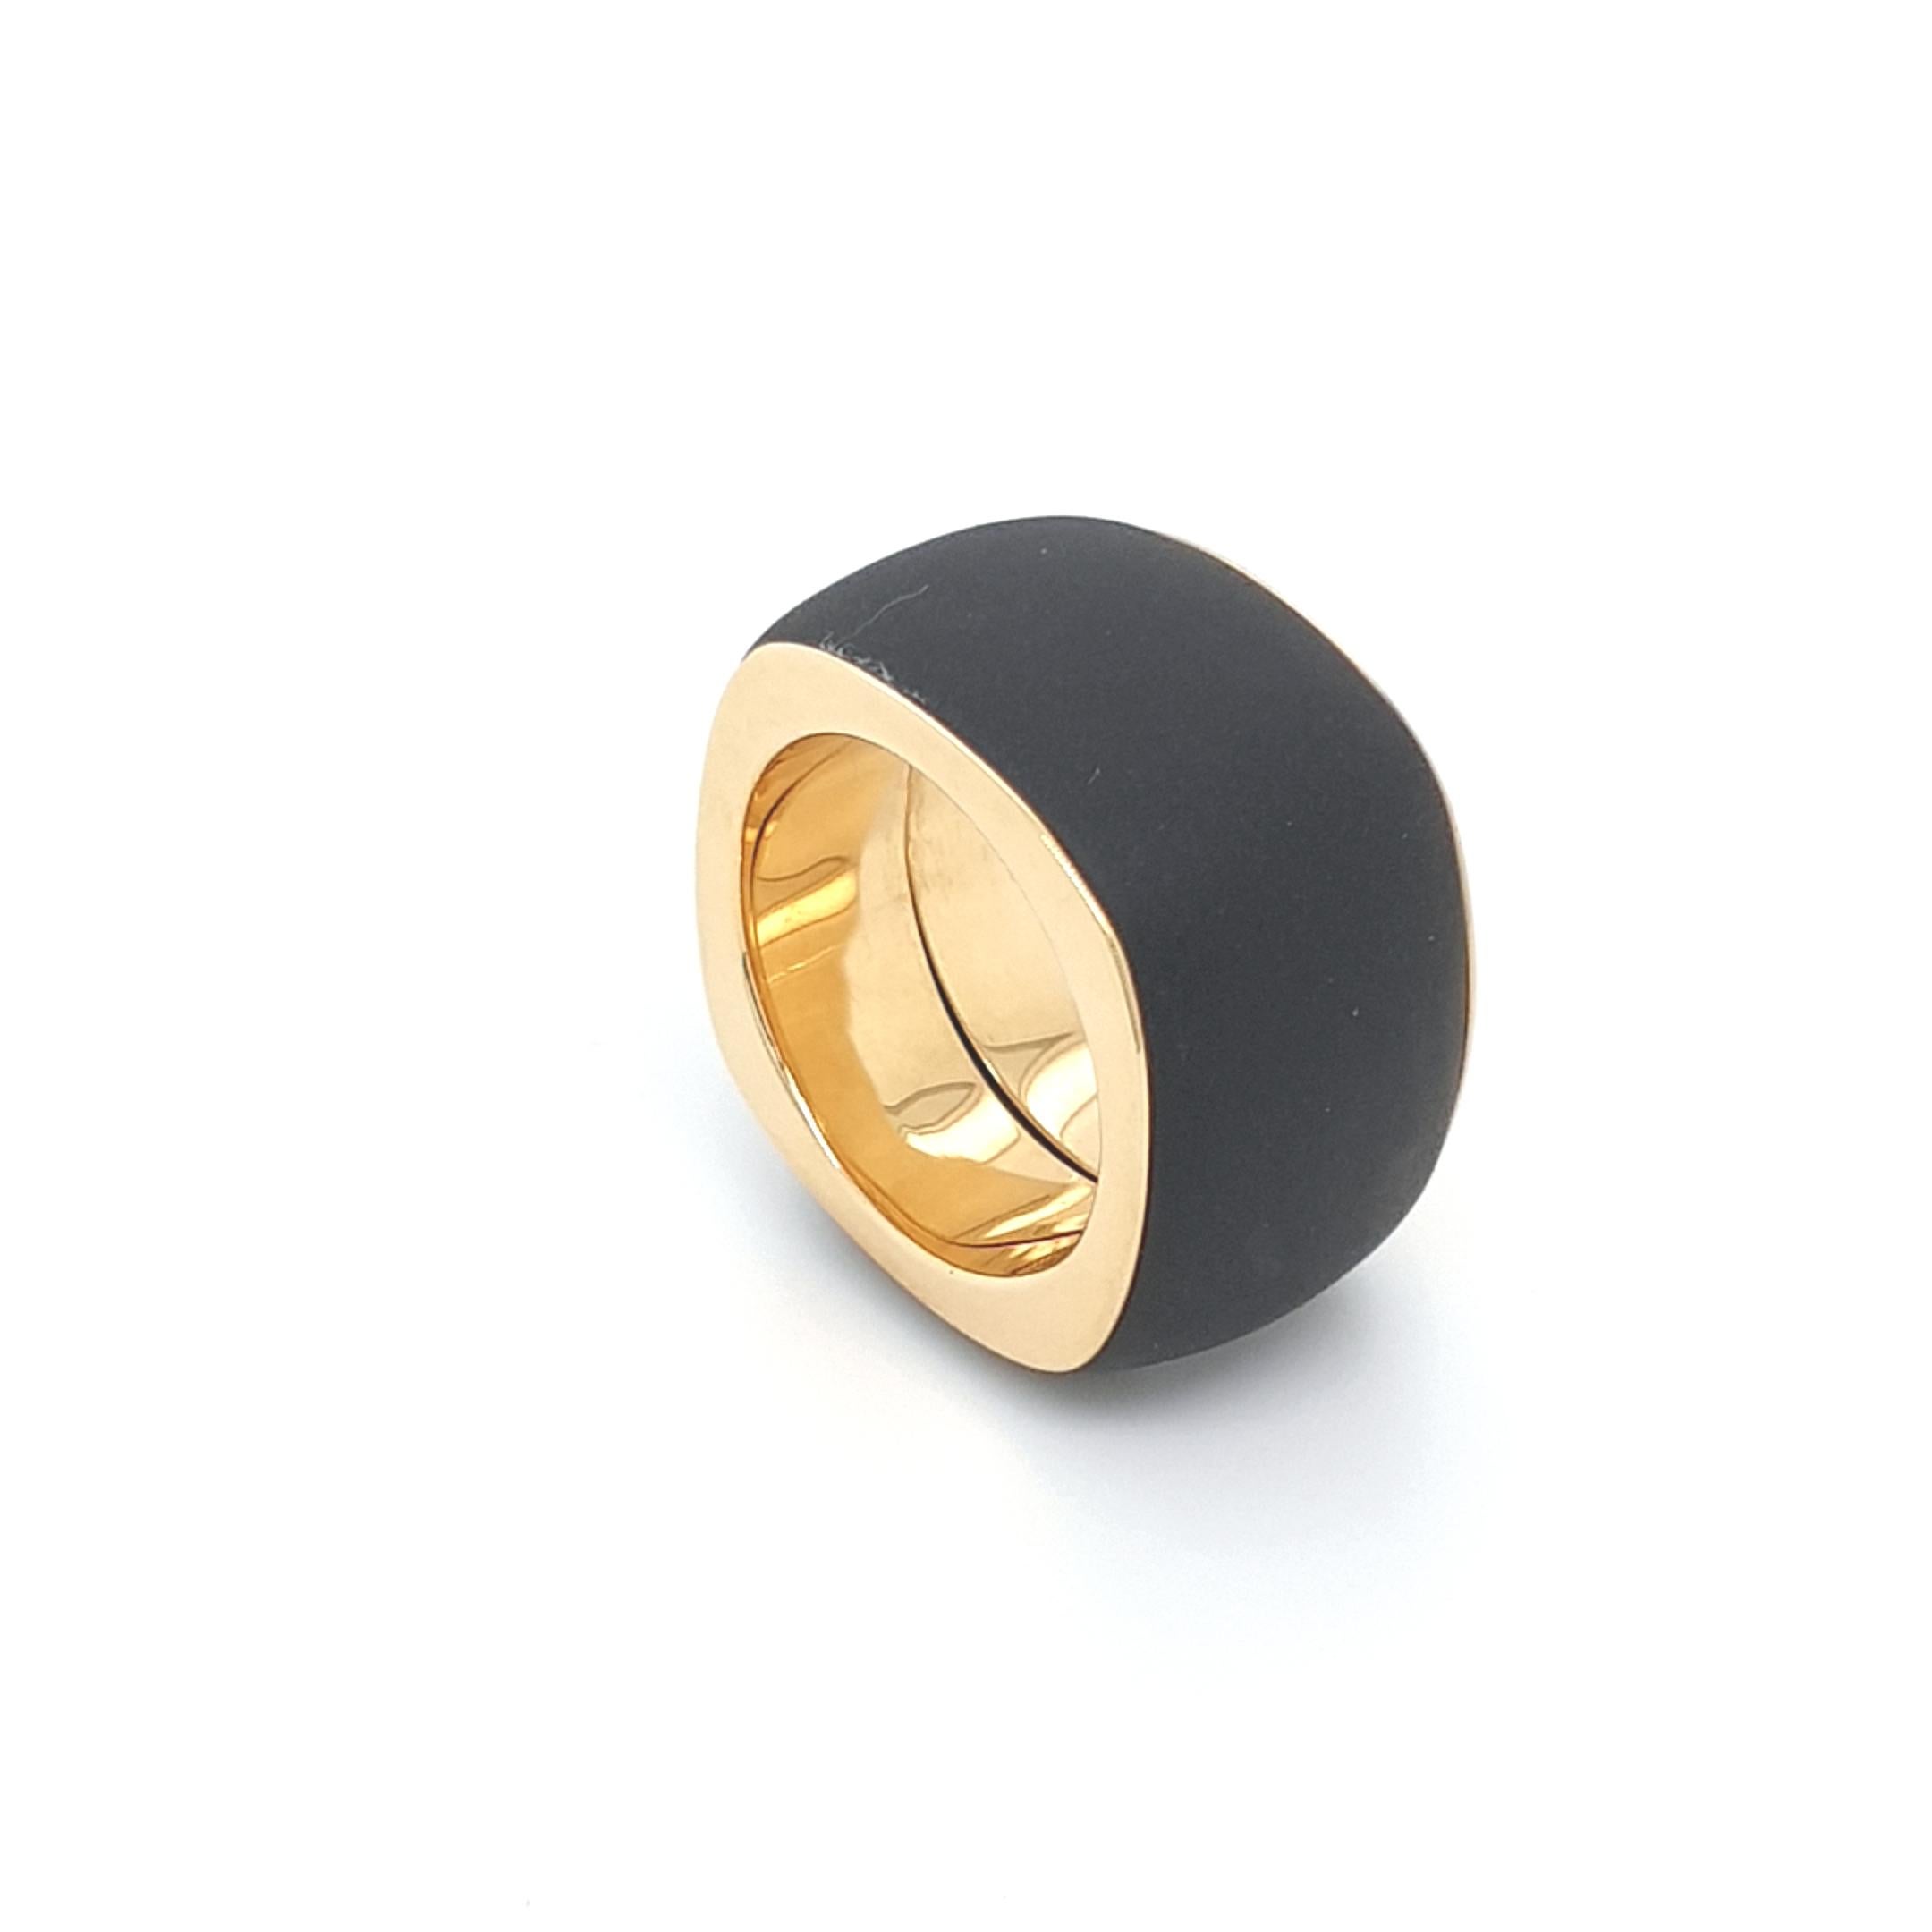 This Black Agate Onyx Ring with 18 Carat Yellow Gold is totally handmade and cut of one piece.
Cutting as well as goldwork are made in German quality.
The cushion shape with semi-polished Onyx combined with 18kt yellow Gold arises an individuel and